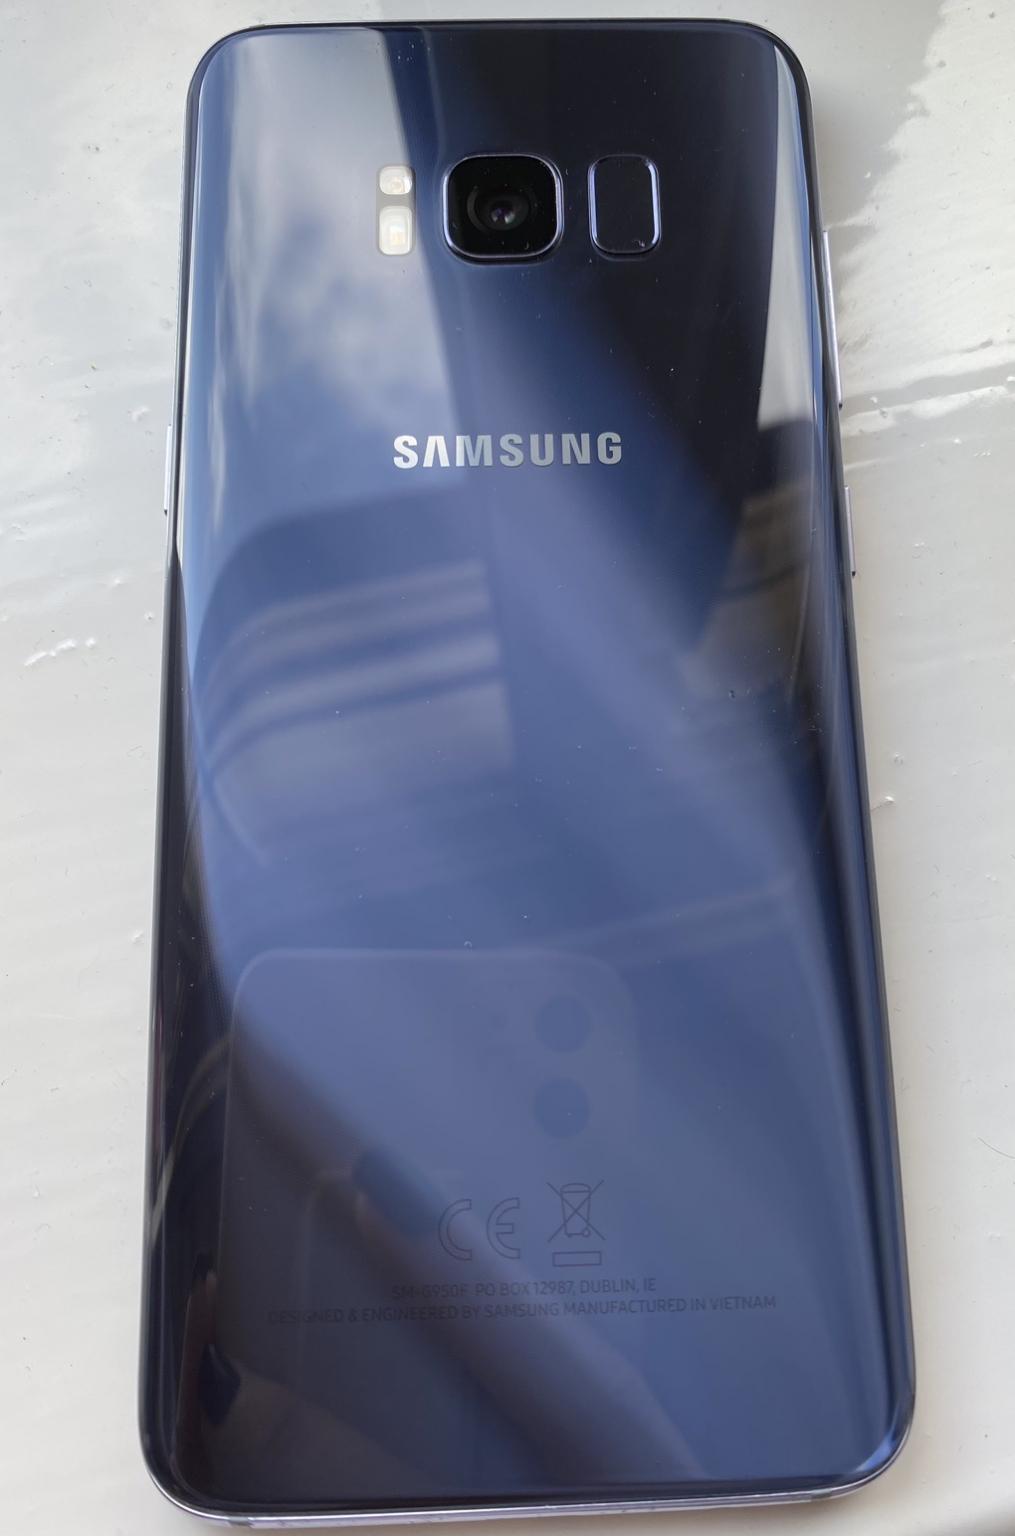 Samsung Galaxy S8 In Co2 Colchester For 110 00 For Sale Shpock